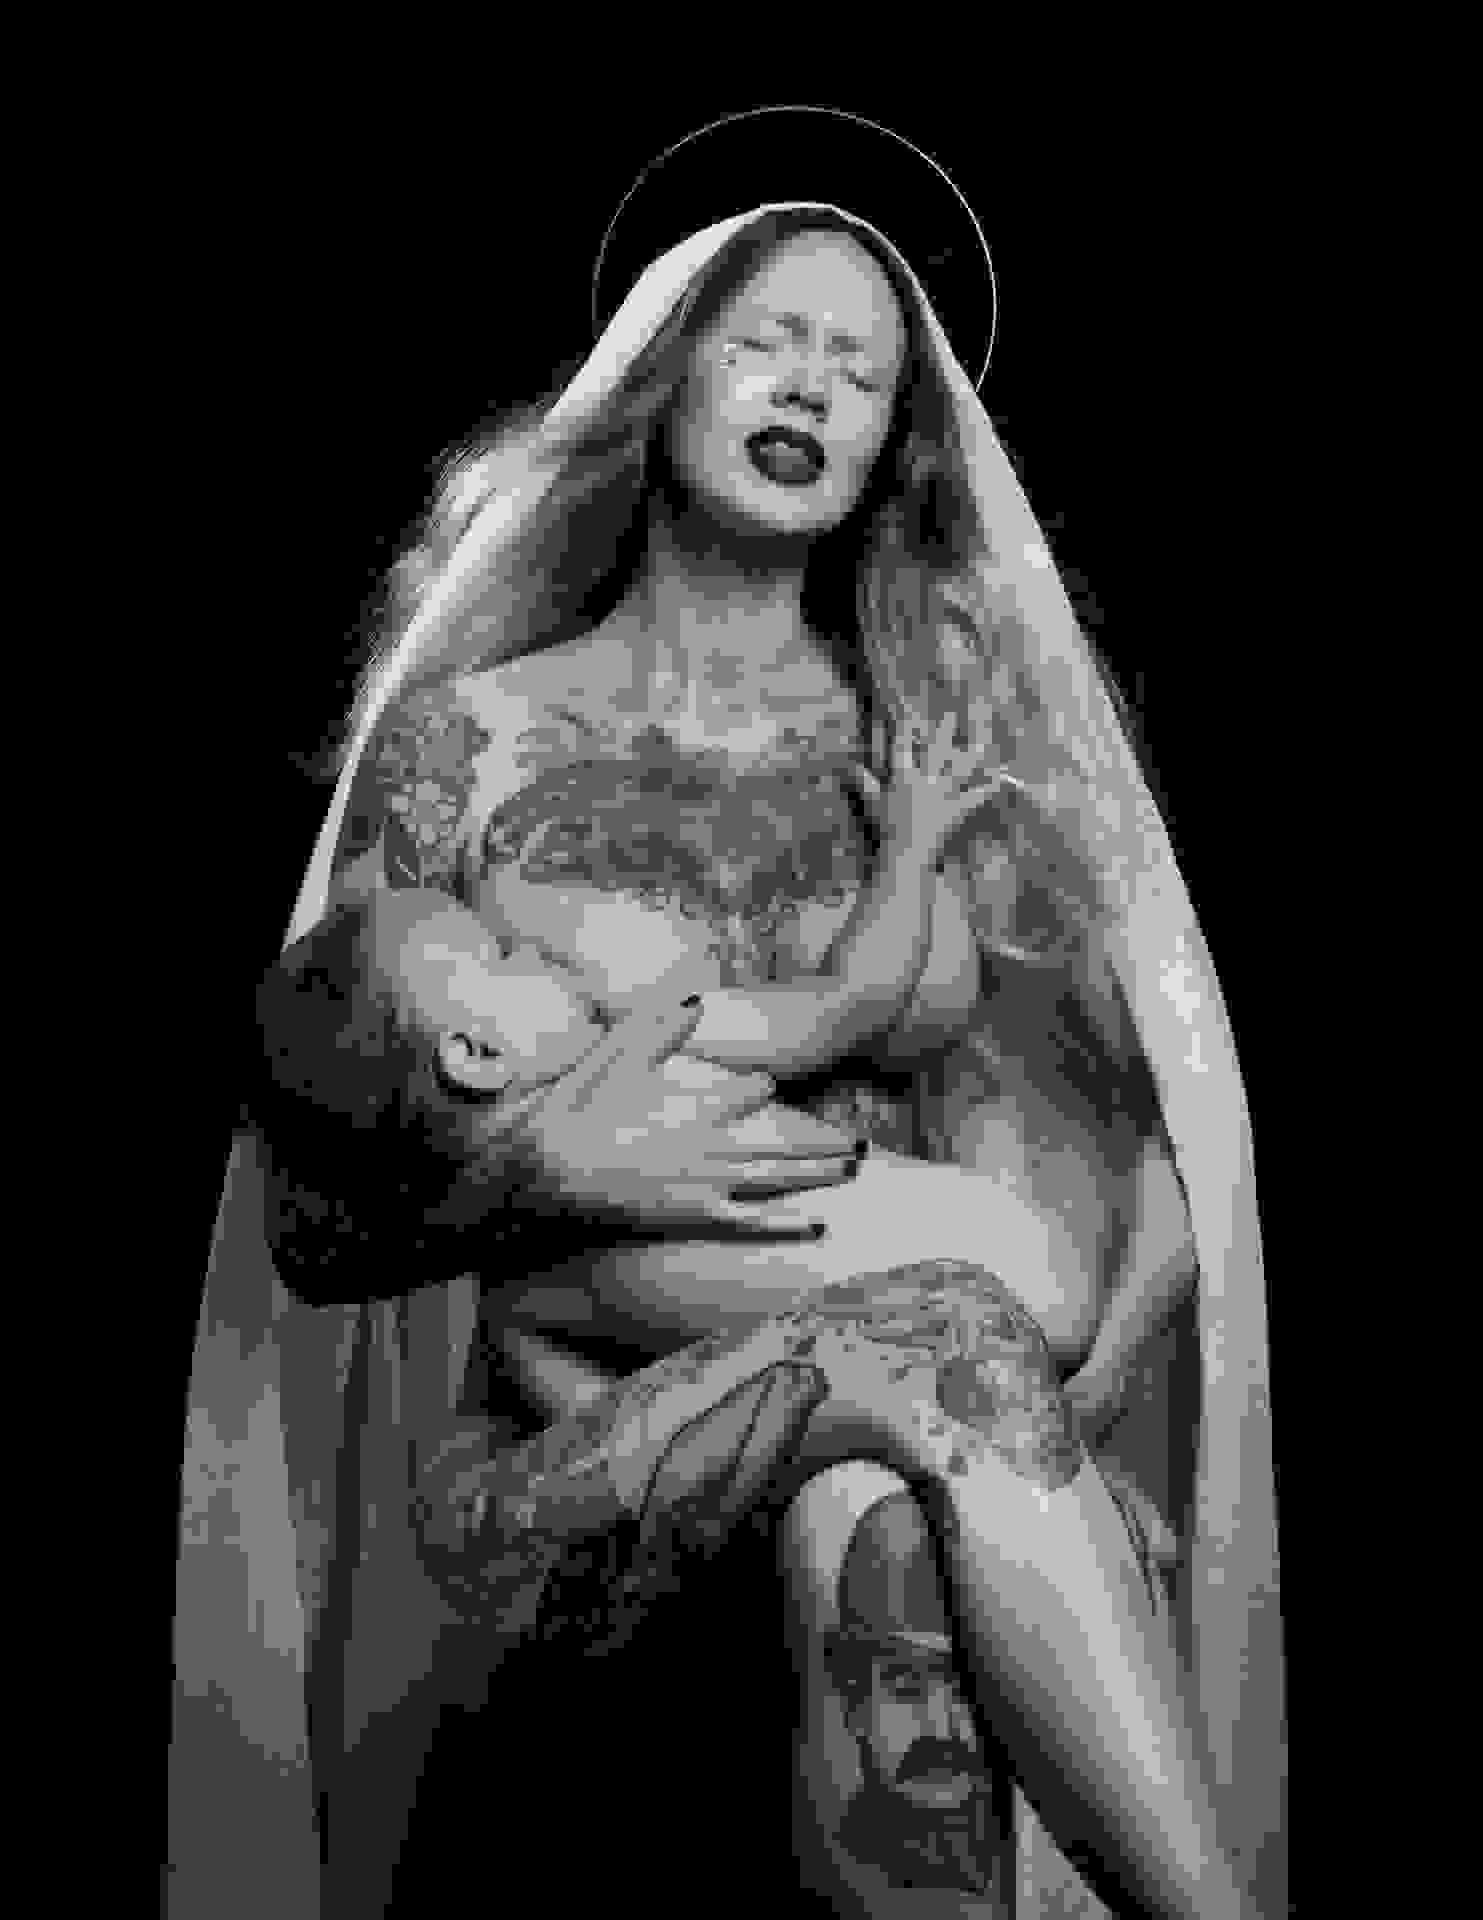 A photograph of a tattooed woman wearing a halo and breastfeeding a baby.